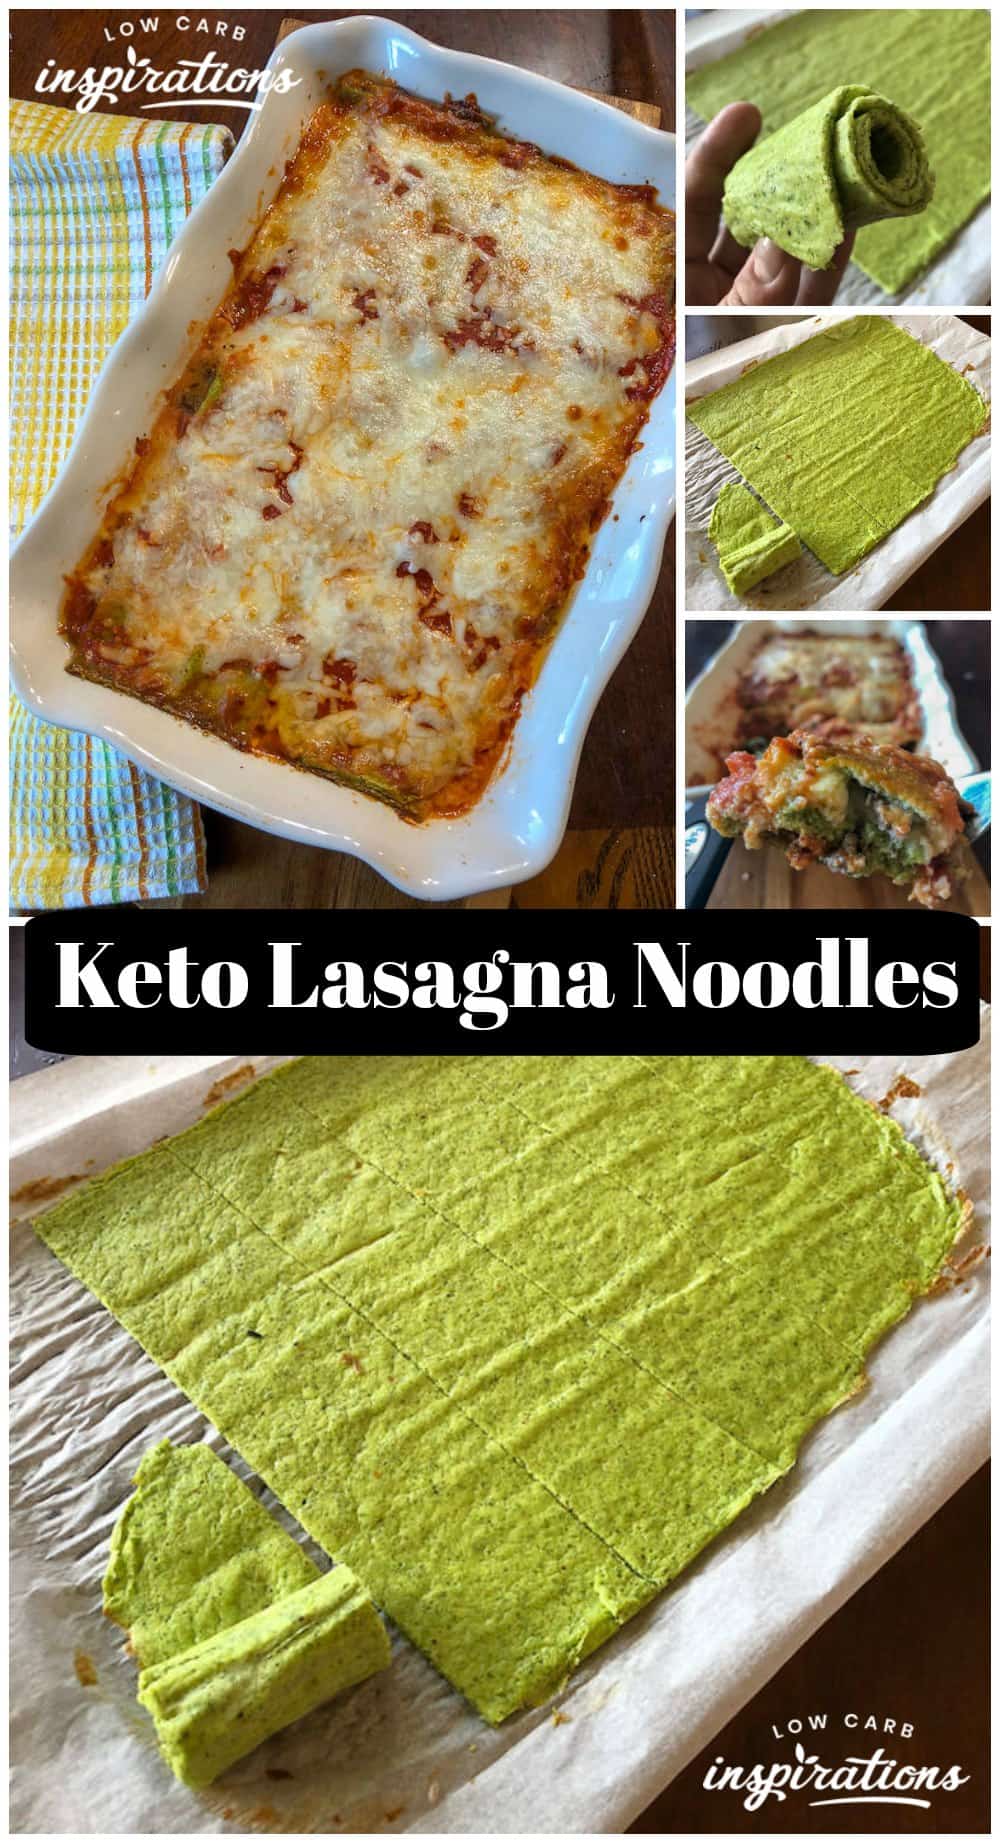 This Keto Noodles recipe is one of the best noodle recipes Ive tried! They are super simple to make and dont take long at all to cook! #keto #lowcarb #noodles #lowcarbnoodles #kale #easy #homemade 